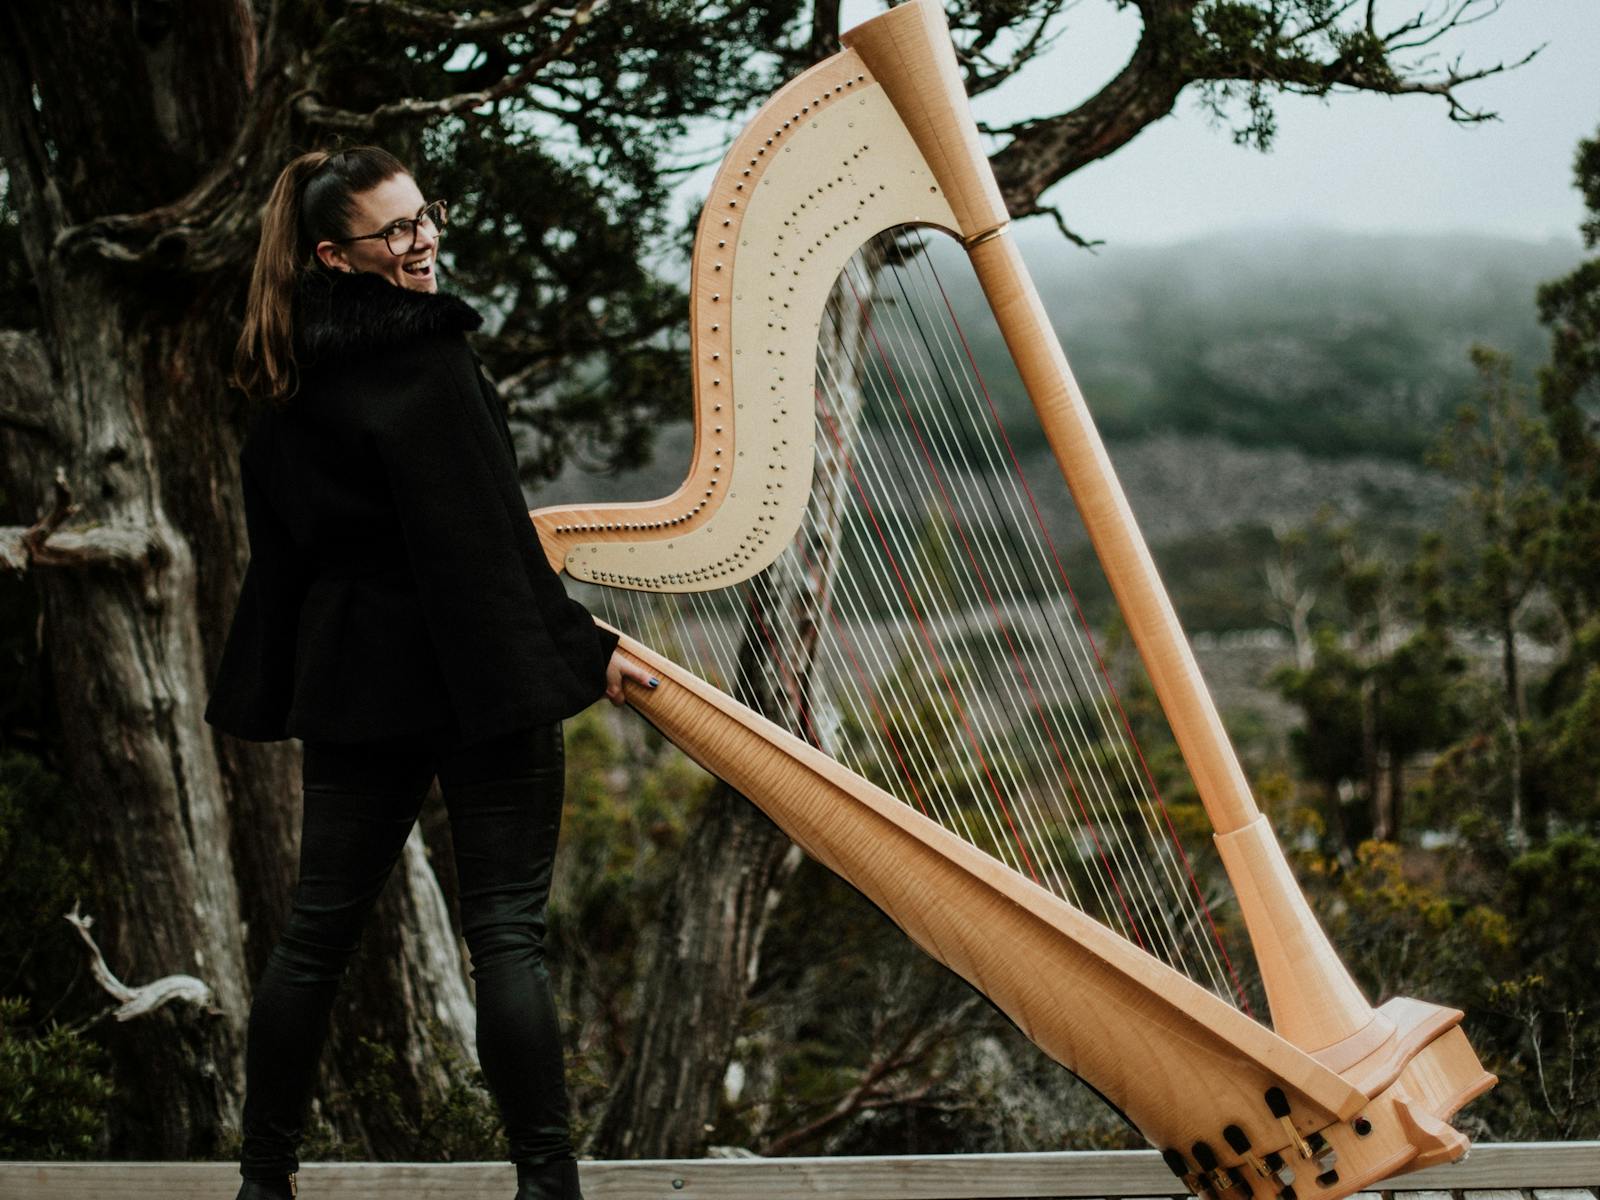 Emily pictured with a harp